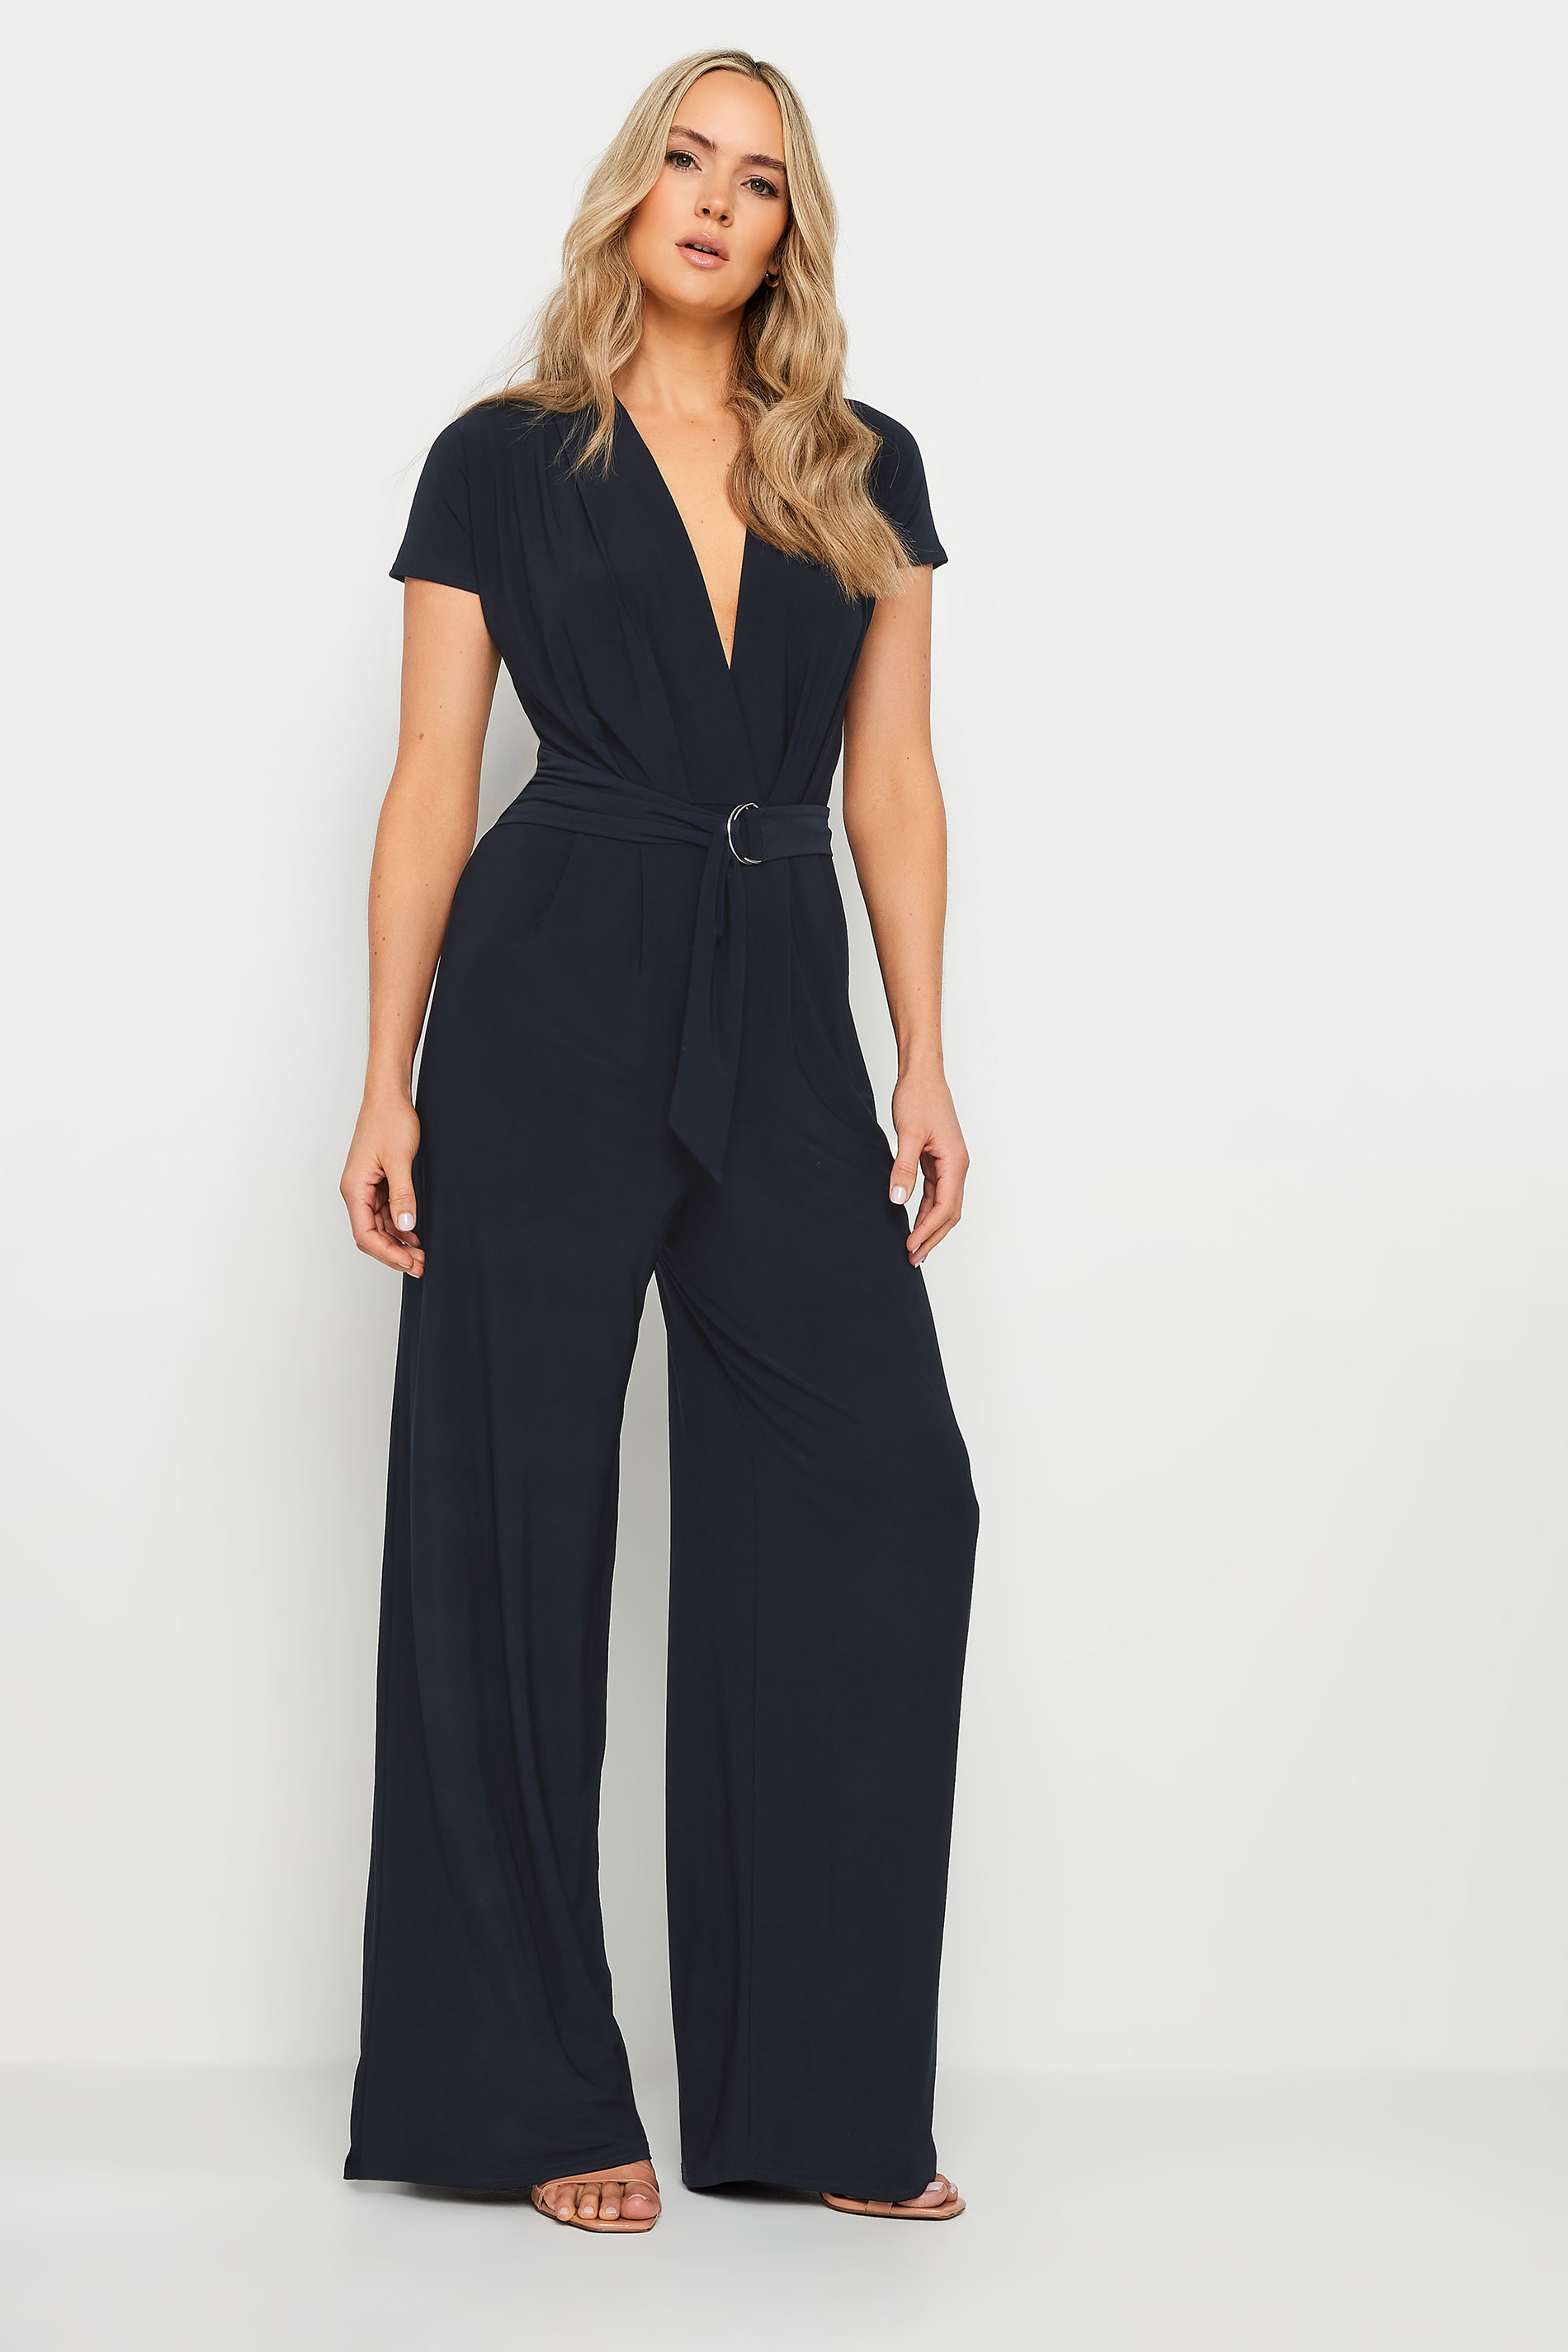 LTS Tall Women's Navy Blue Pleated Jumpsuit | Long Tall Sally 2